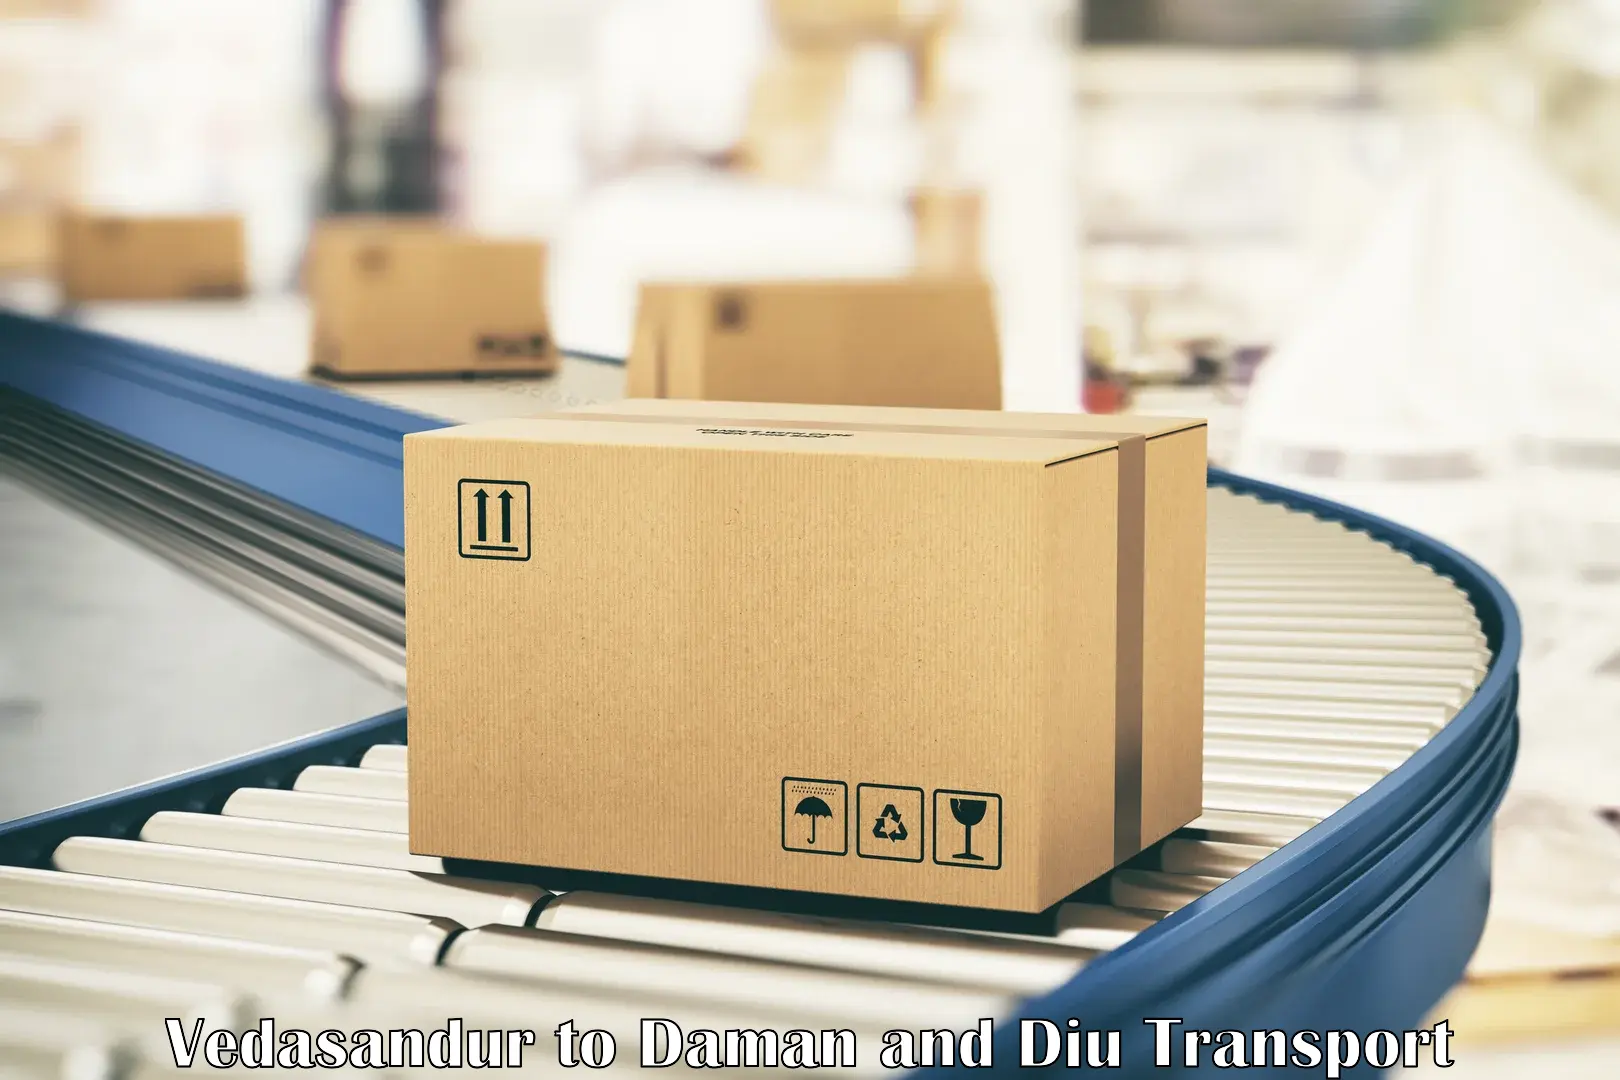 Shipping services in Vedasandur to Daman and Diu